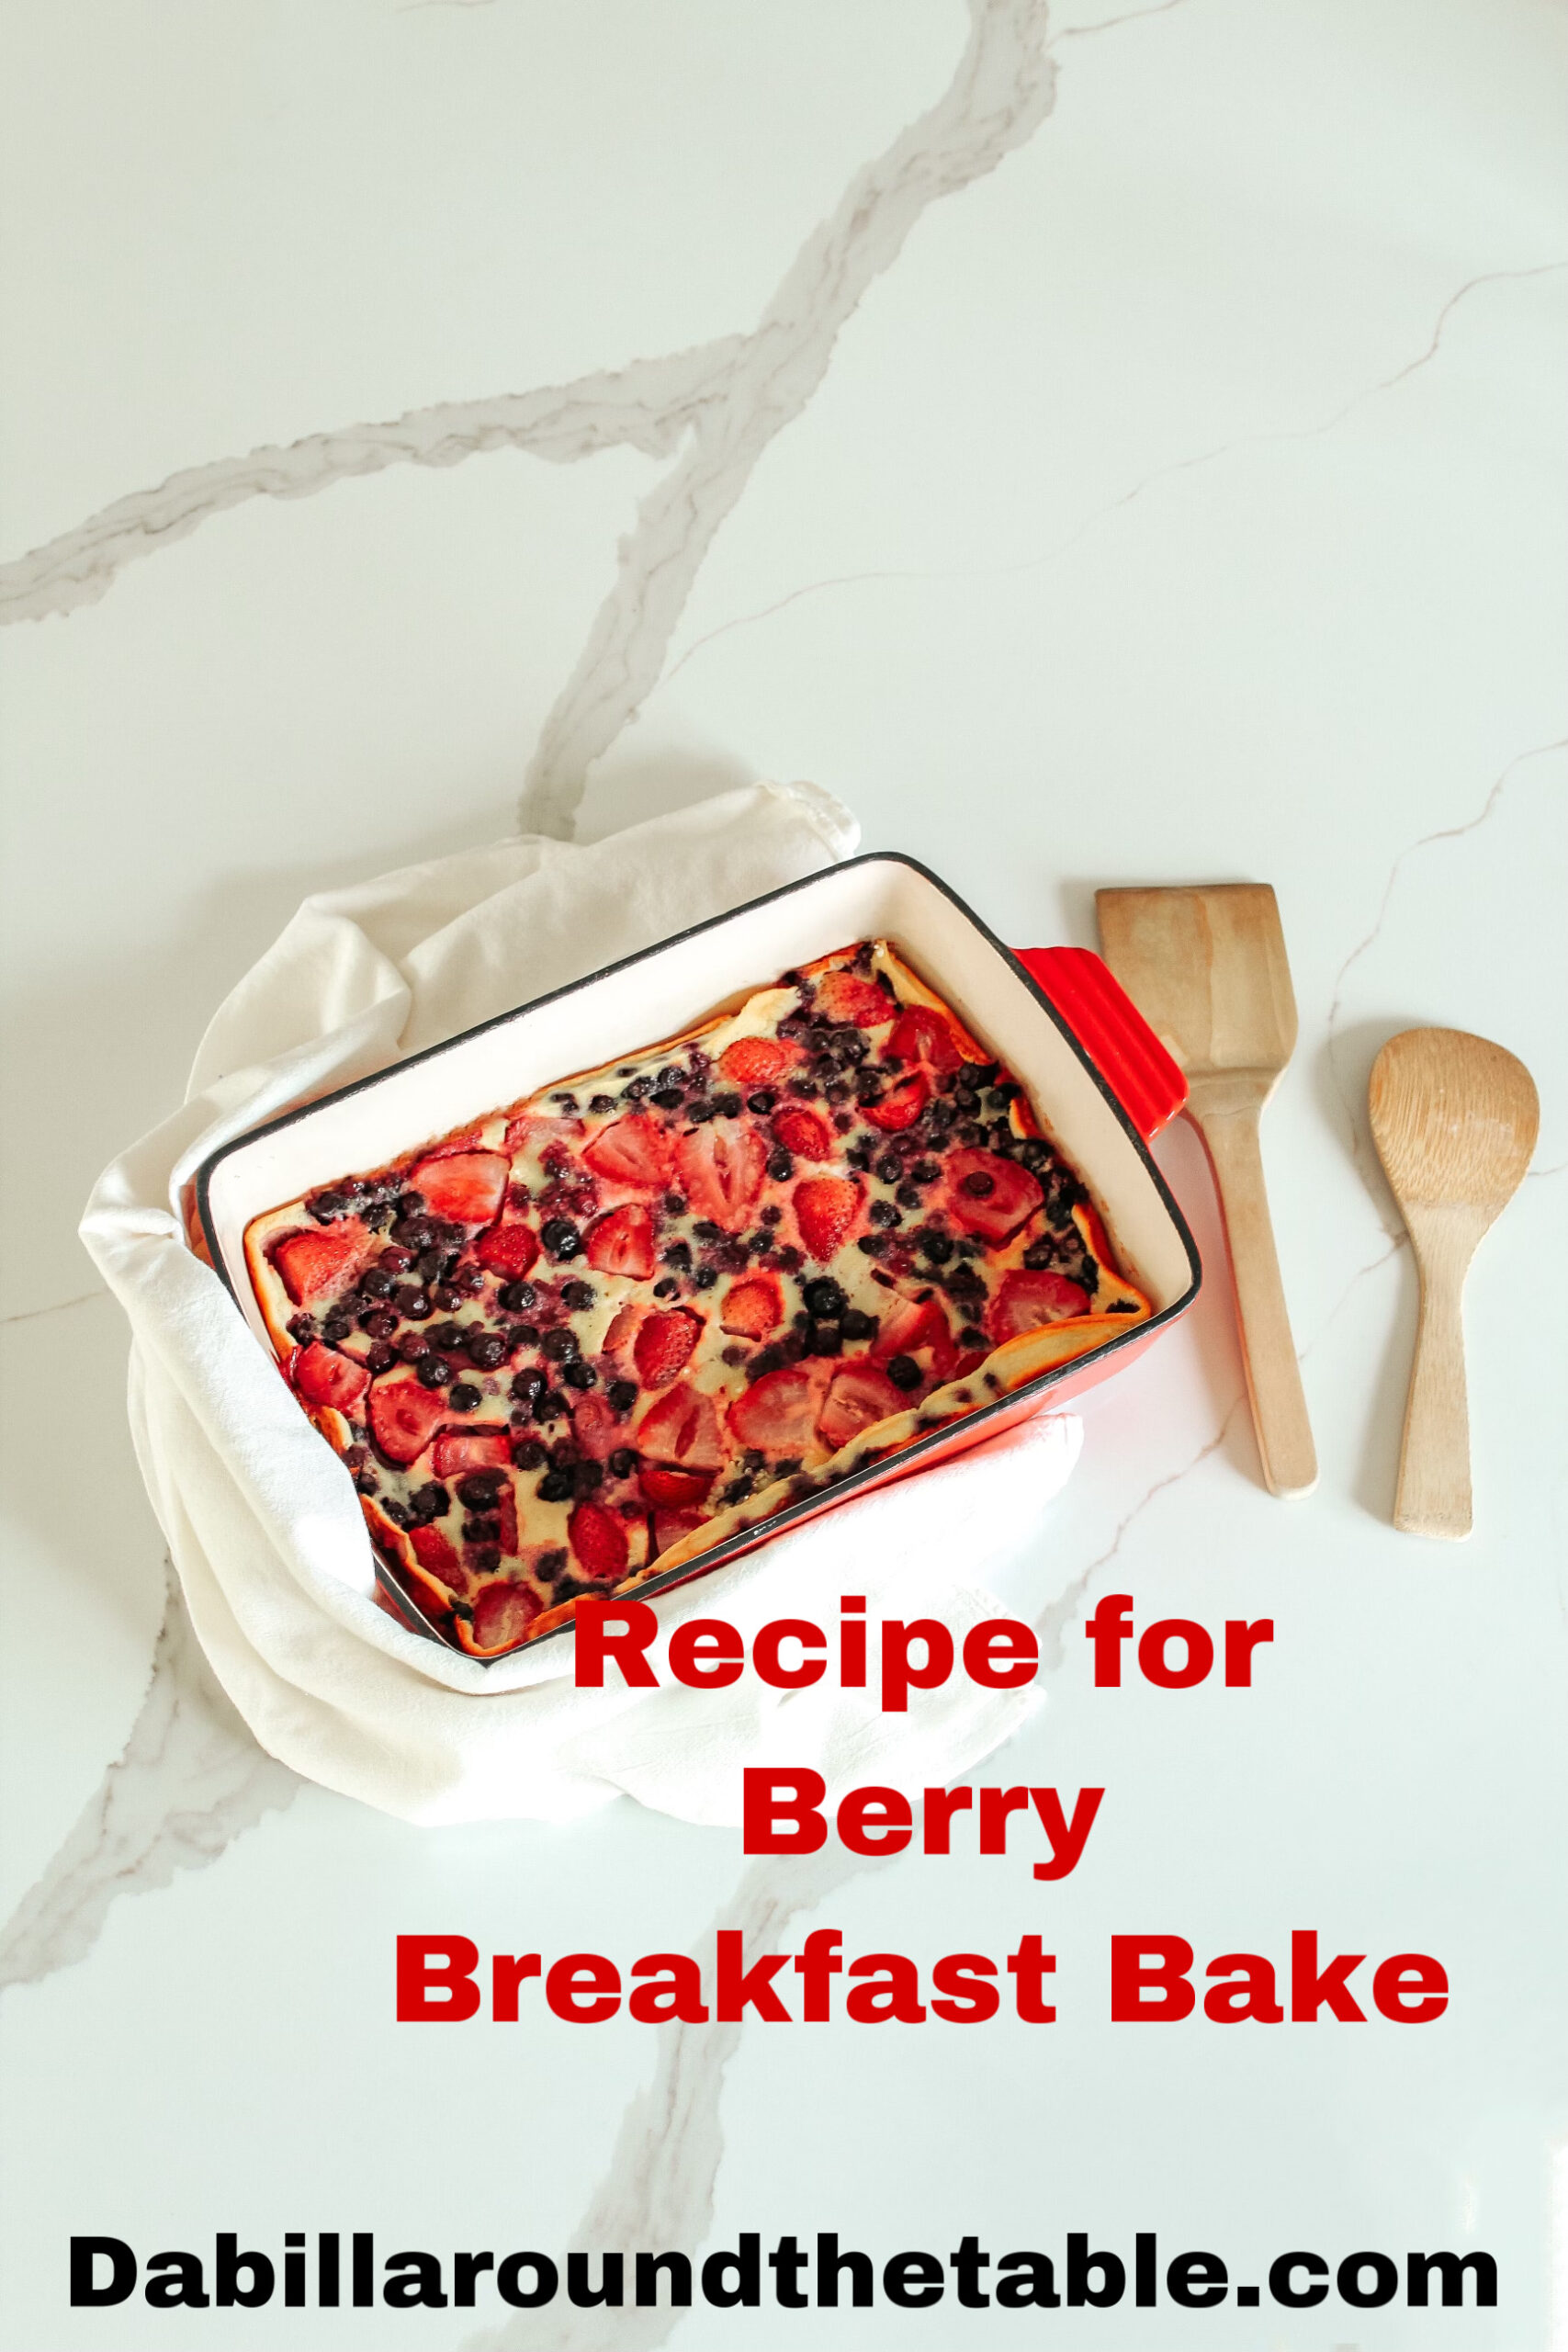 Berry Breakfast Bake Recipe and its Nutrition Benefits ...